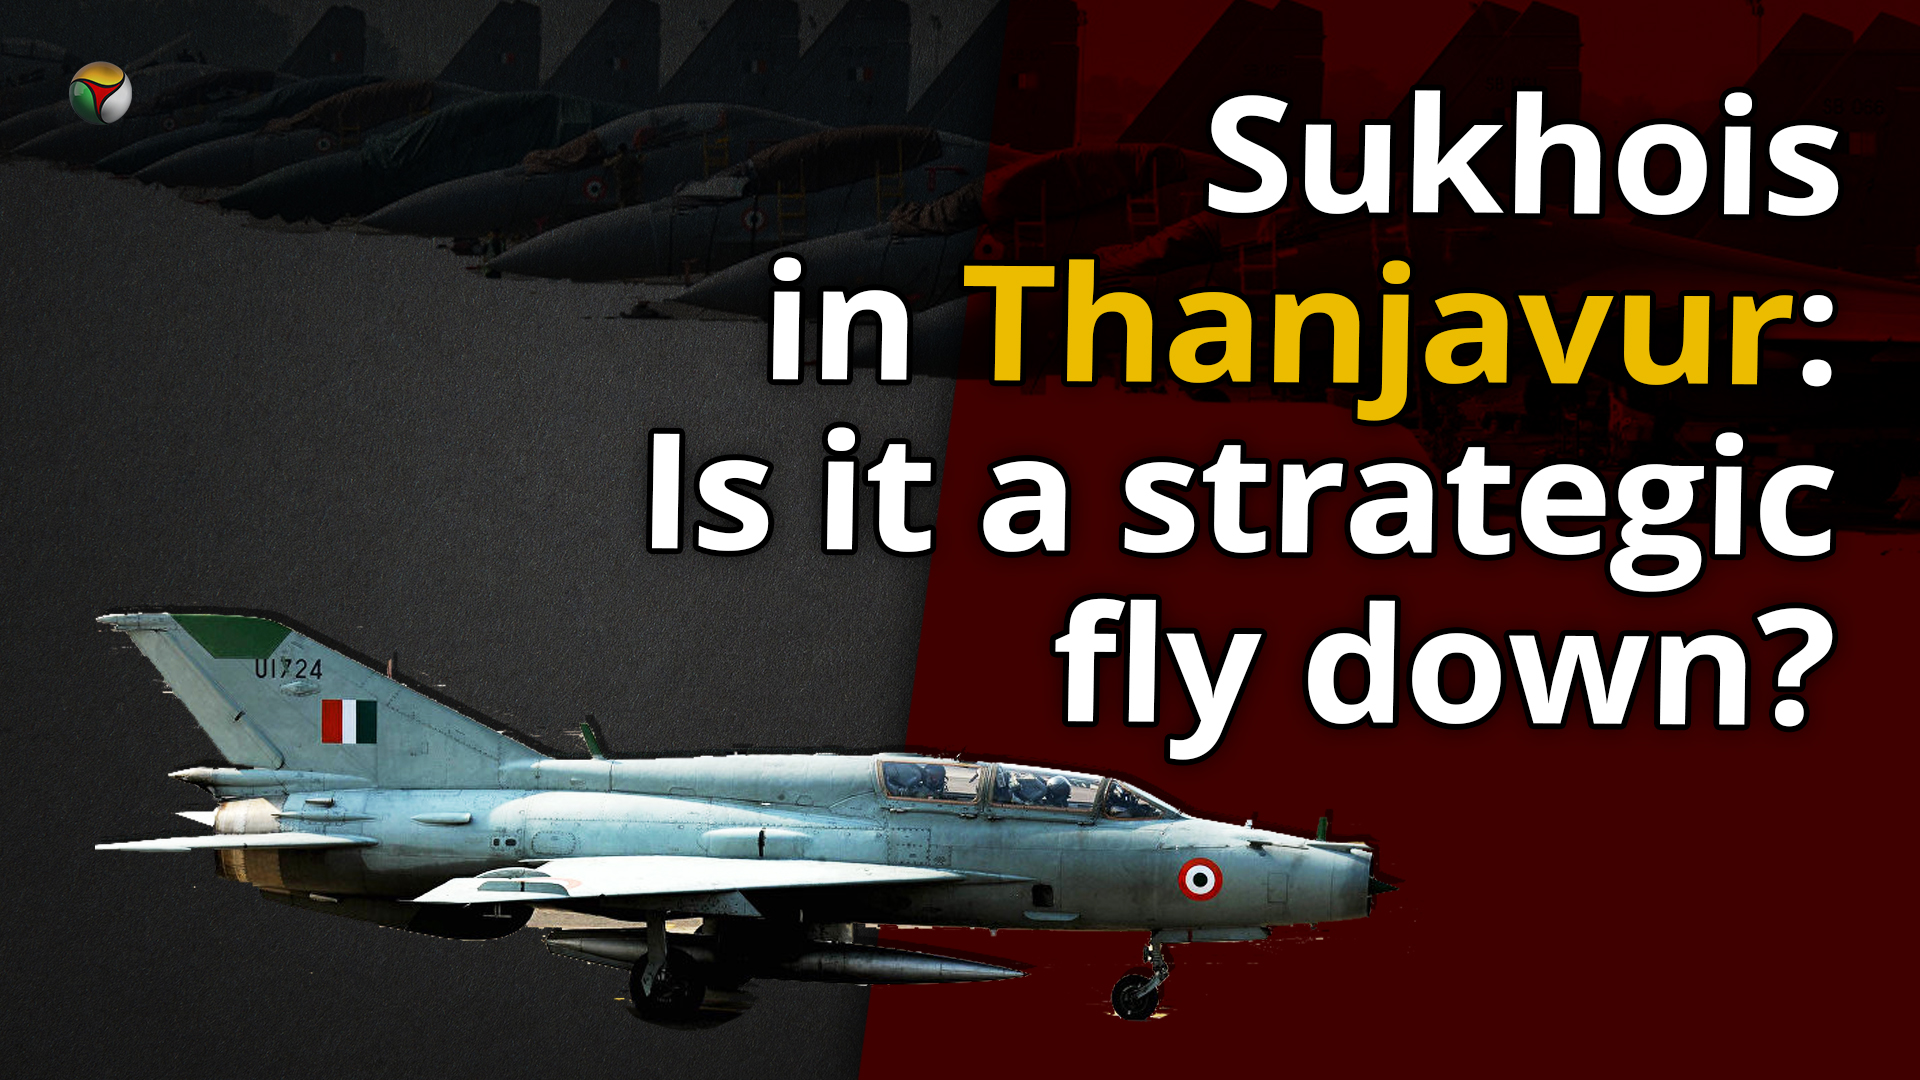 Sukhois in Thanjavur: Is it a strategic fly down?